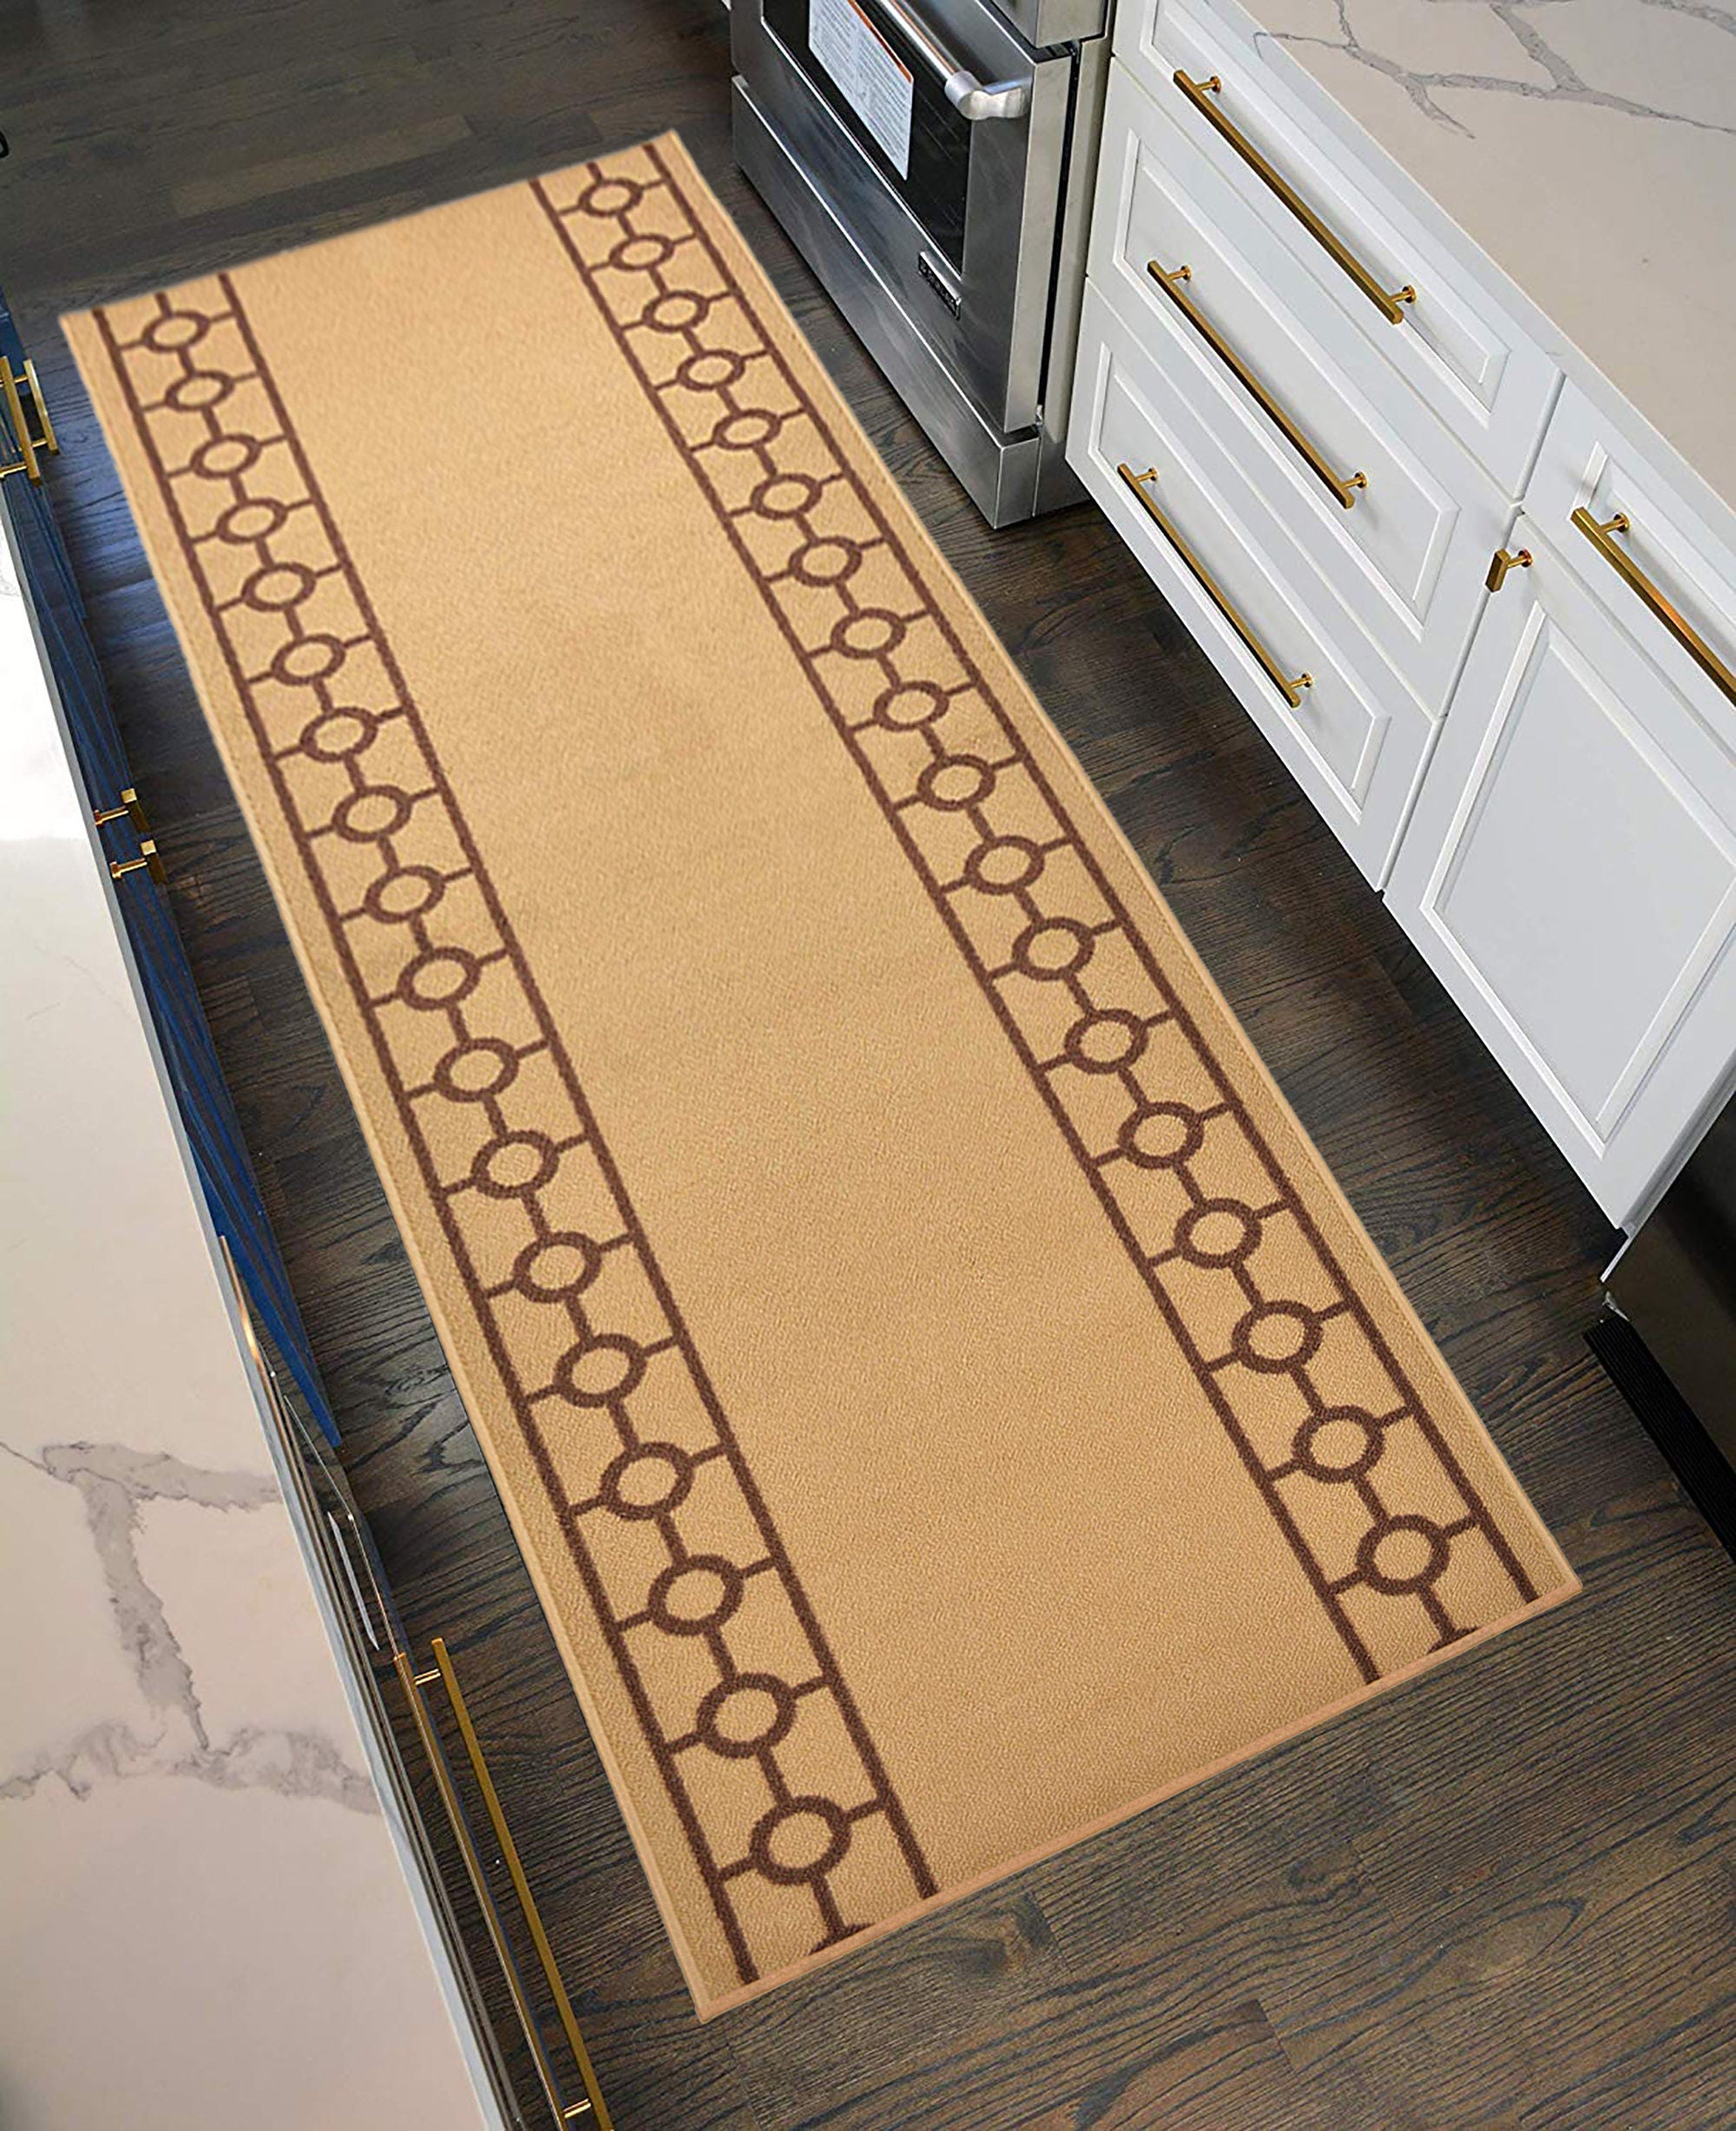 Custom Size Runner Rug Chain Border Beige with Brown Border Skid Resistant Runner Rug 26 Inches and 32 Inches Wide Customize By Feet-1